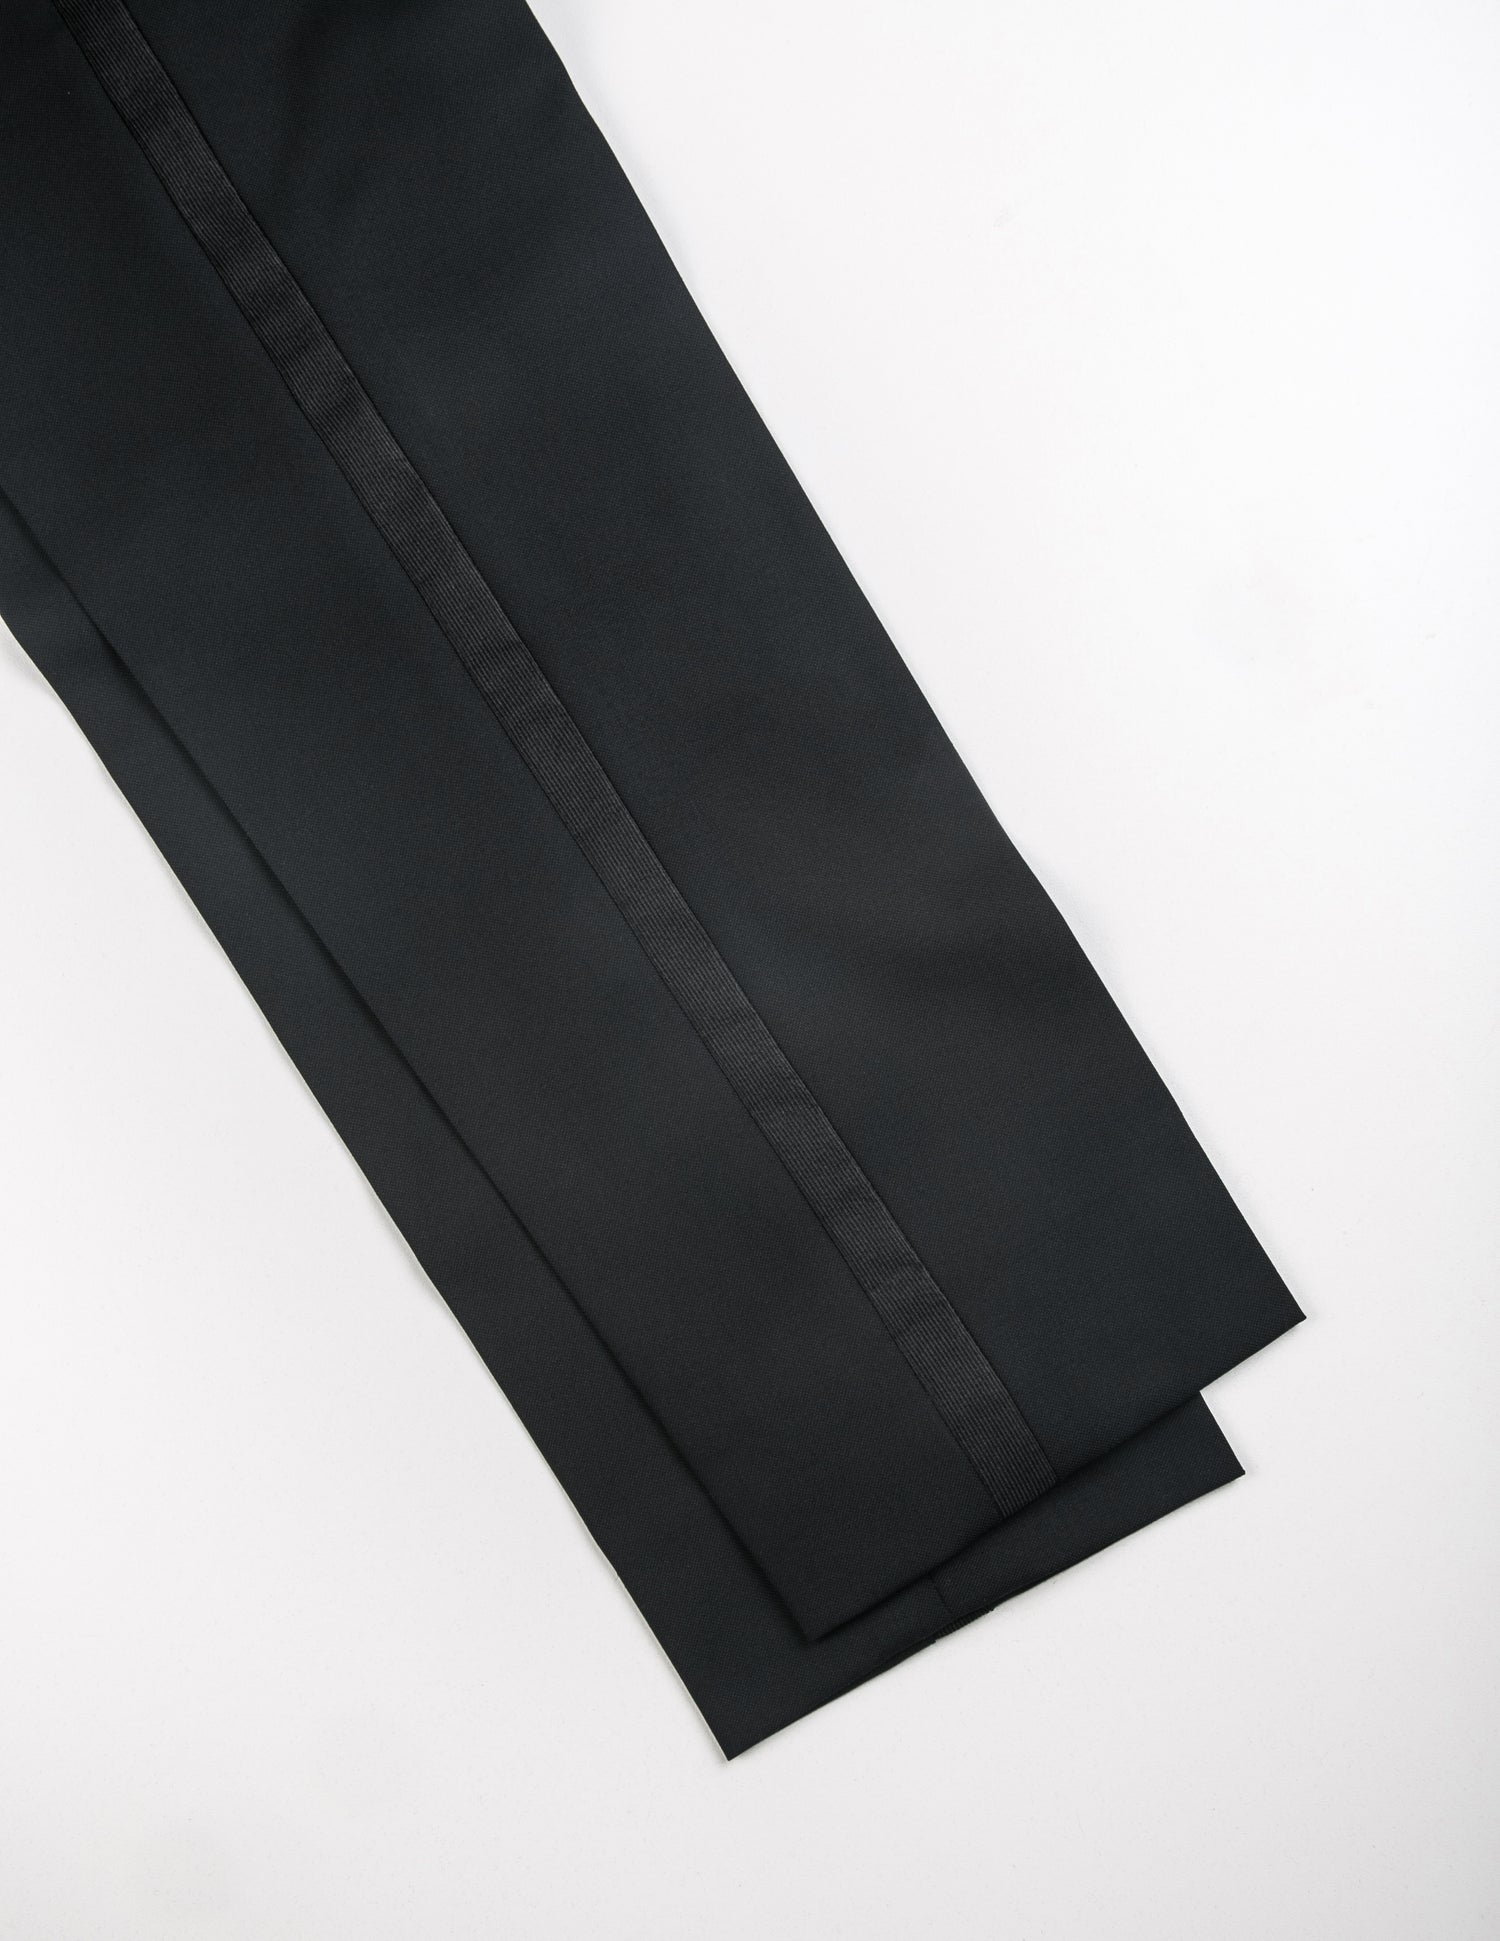 Detail shot of BKT50 Tuxedo Trouser in Super 110s - Black with Grosgrain Stripe showing satin stripe and fabric texture